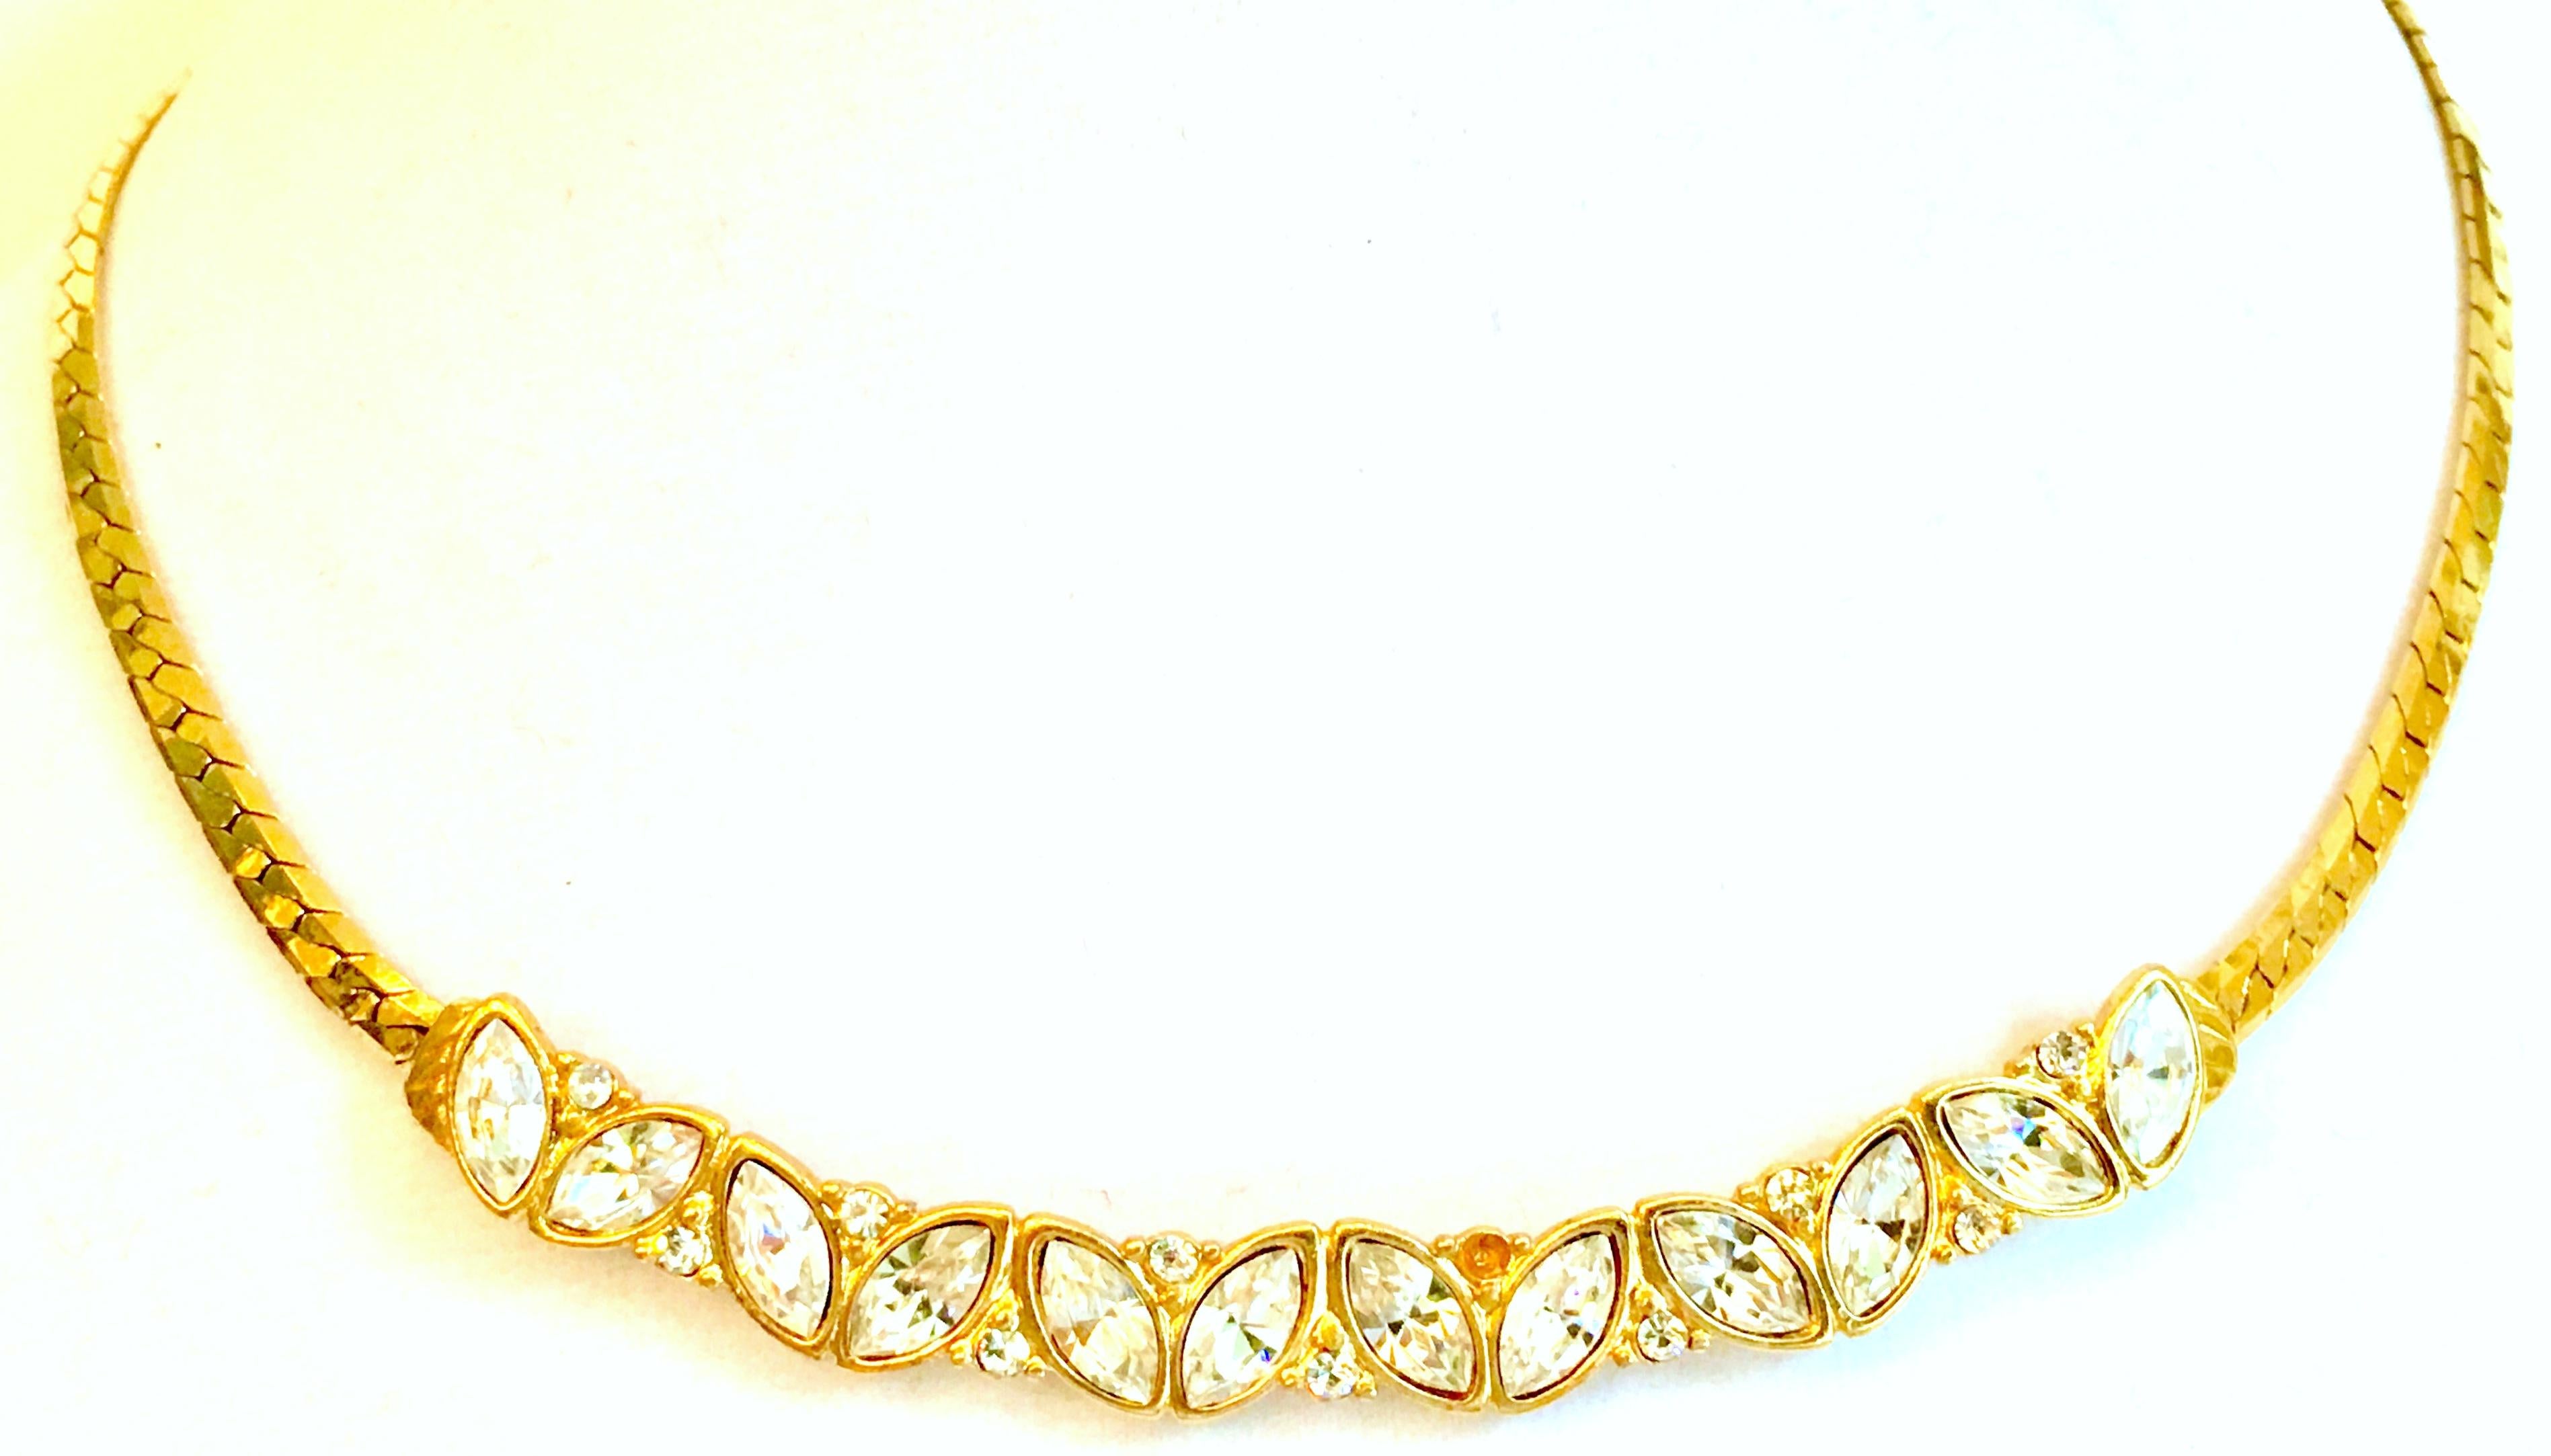 1980'S Gold Plate & Swarovski Crystal Clear Rhinestone Choker Style Necklace By, Monet. Signed on the locking claw style clasp as well as the hang tag at the clasp, Monet.